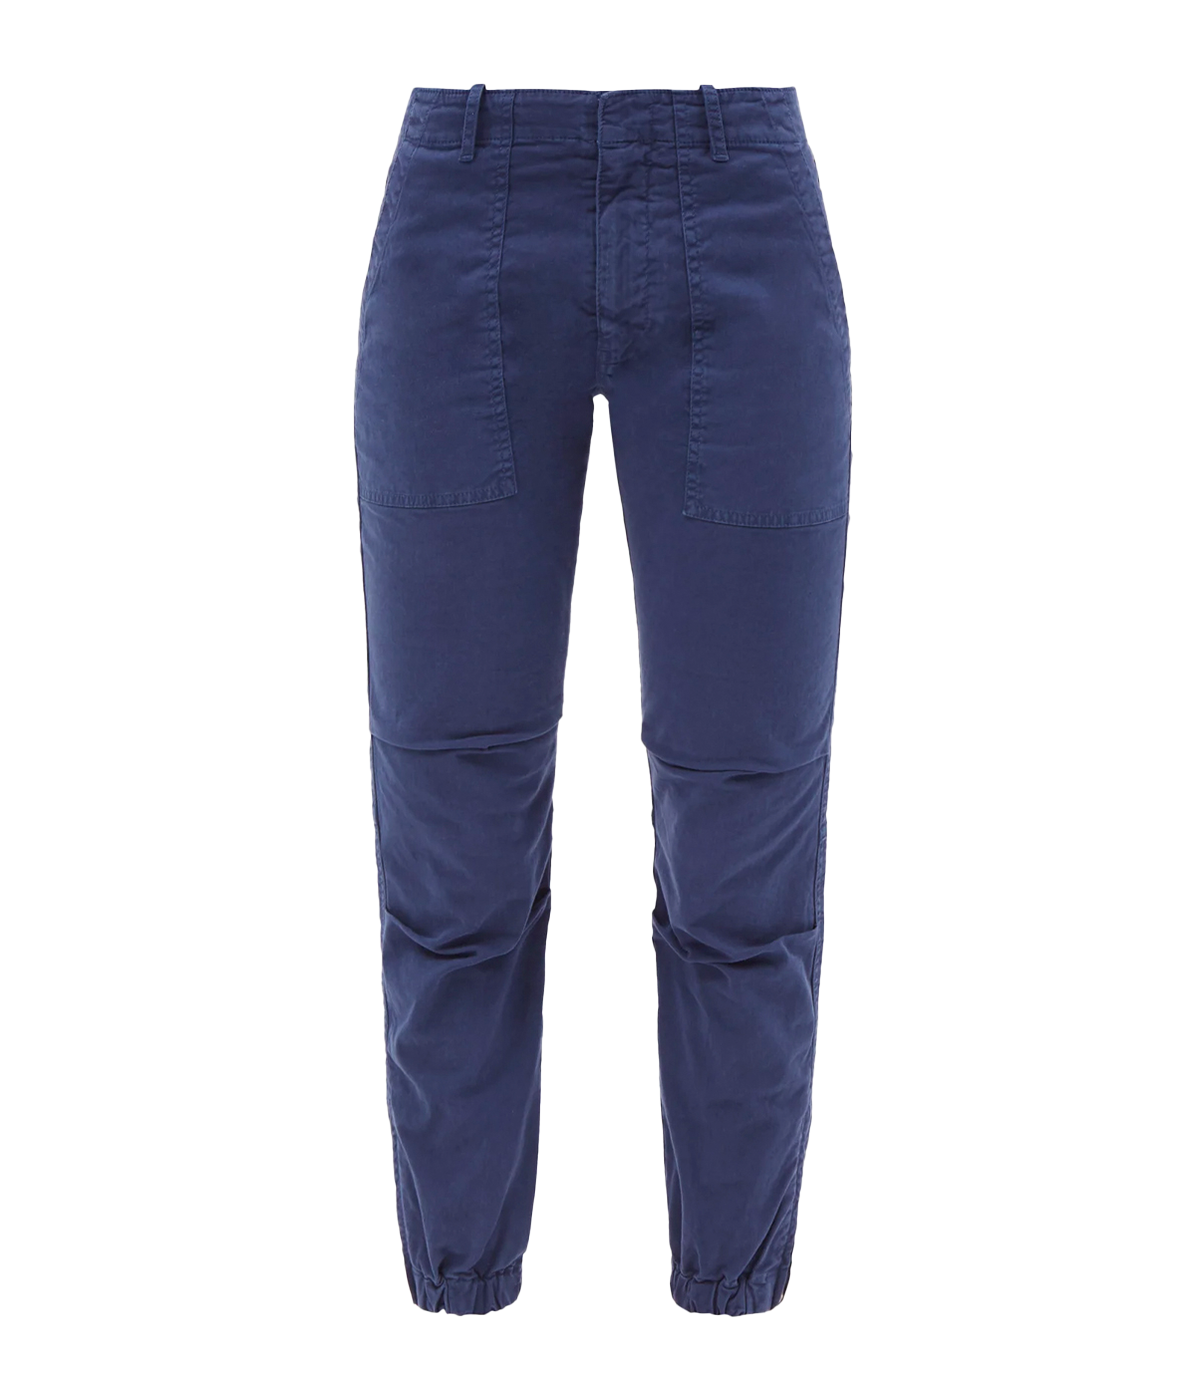 Cropped Military Pant in Marine Blue